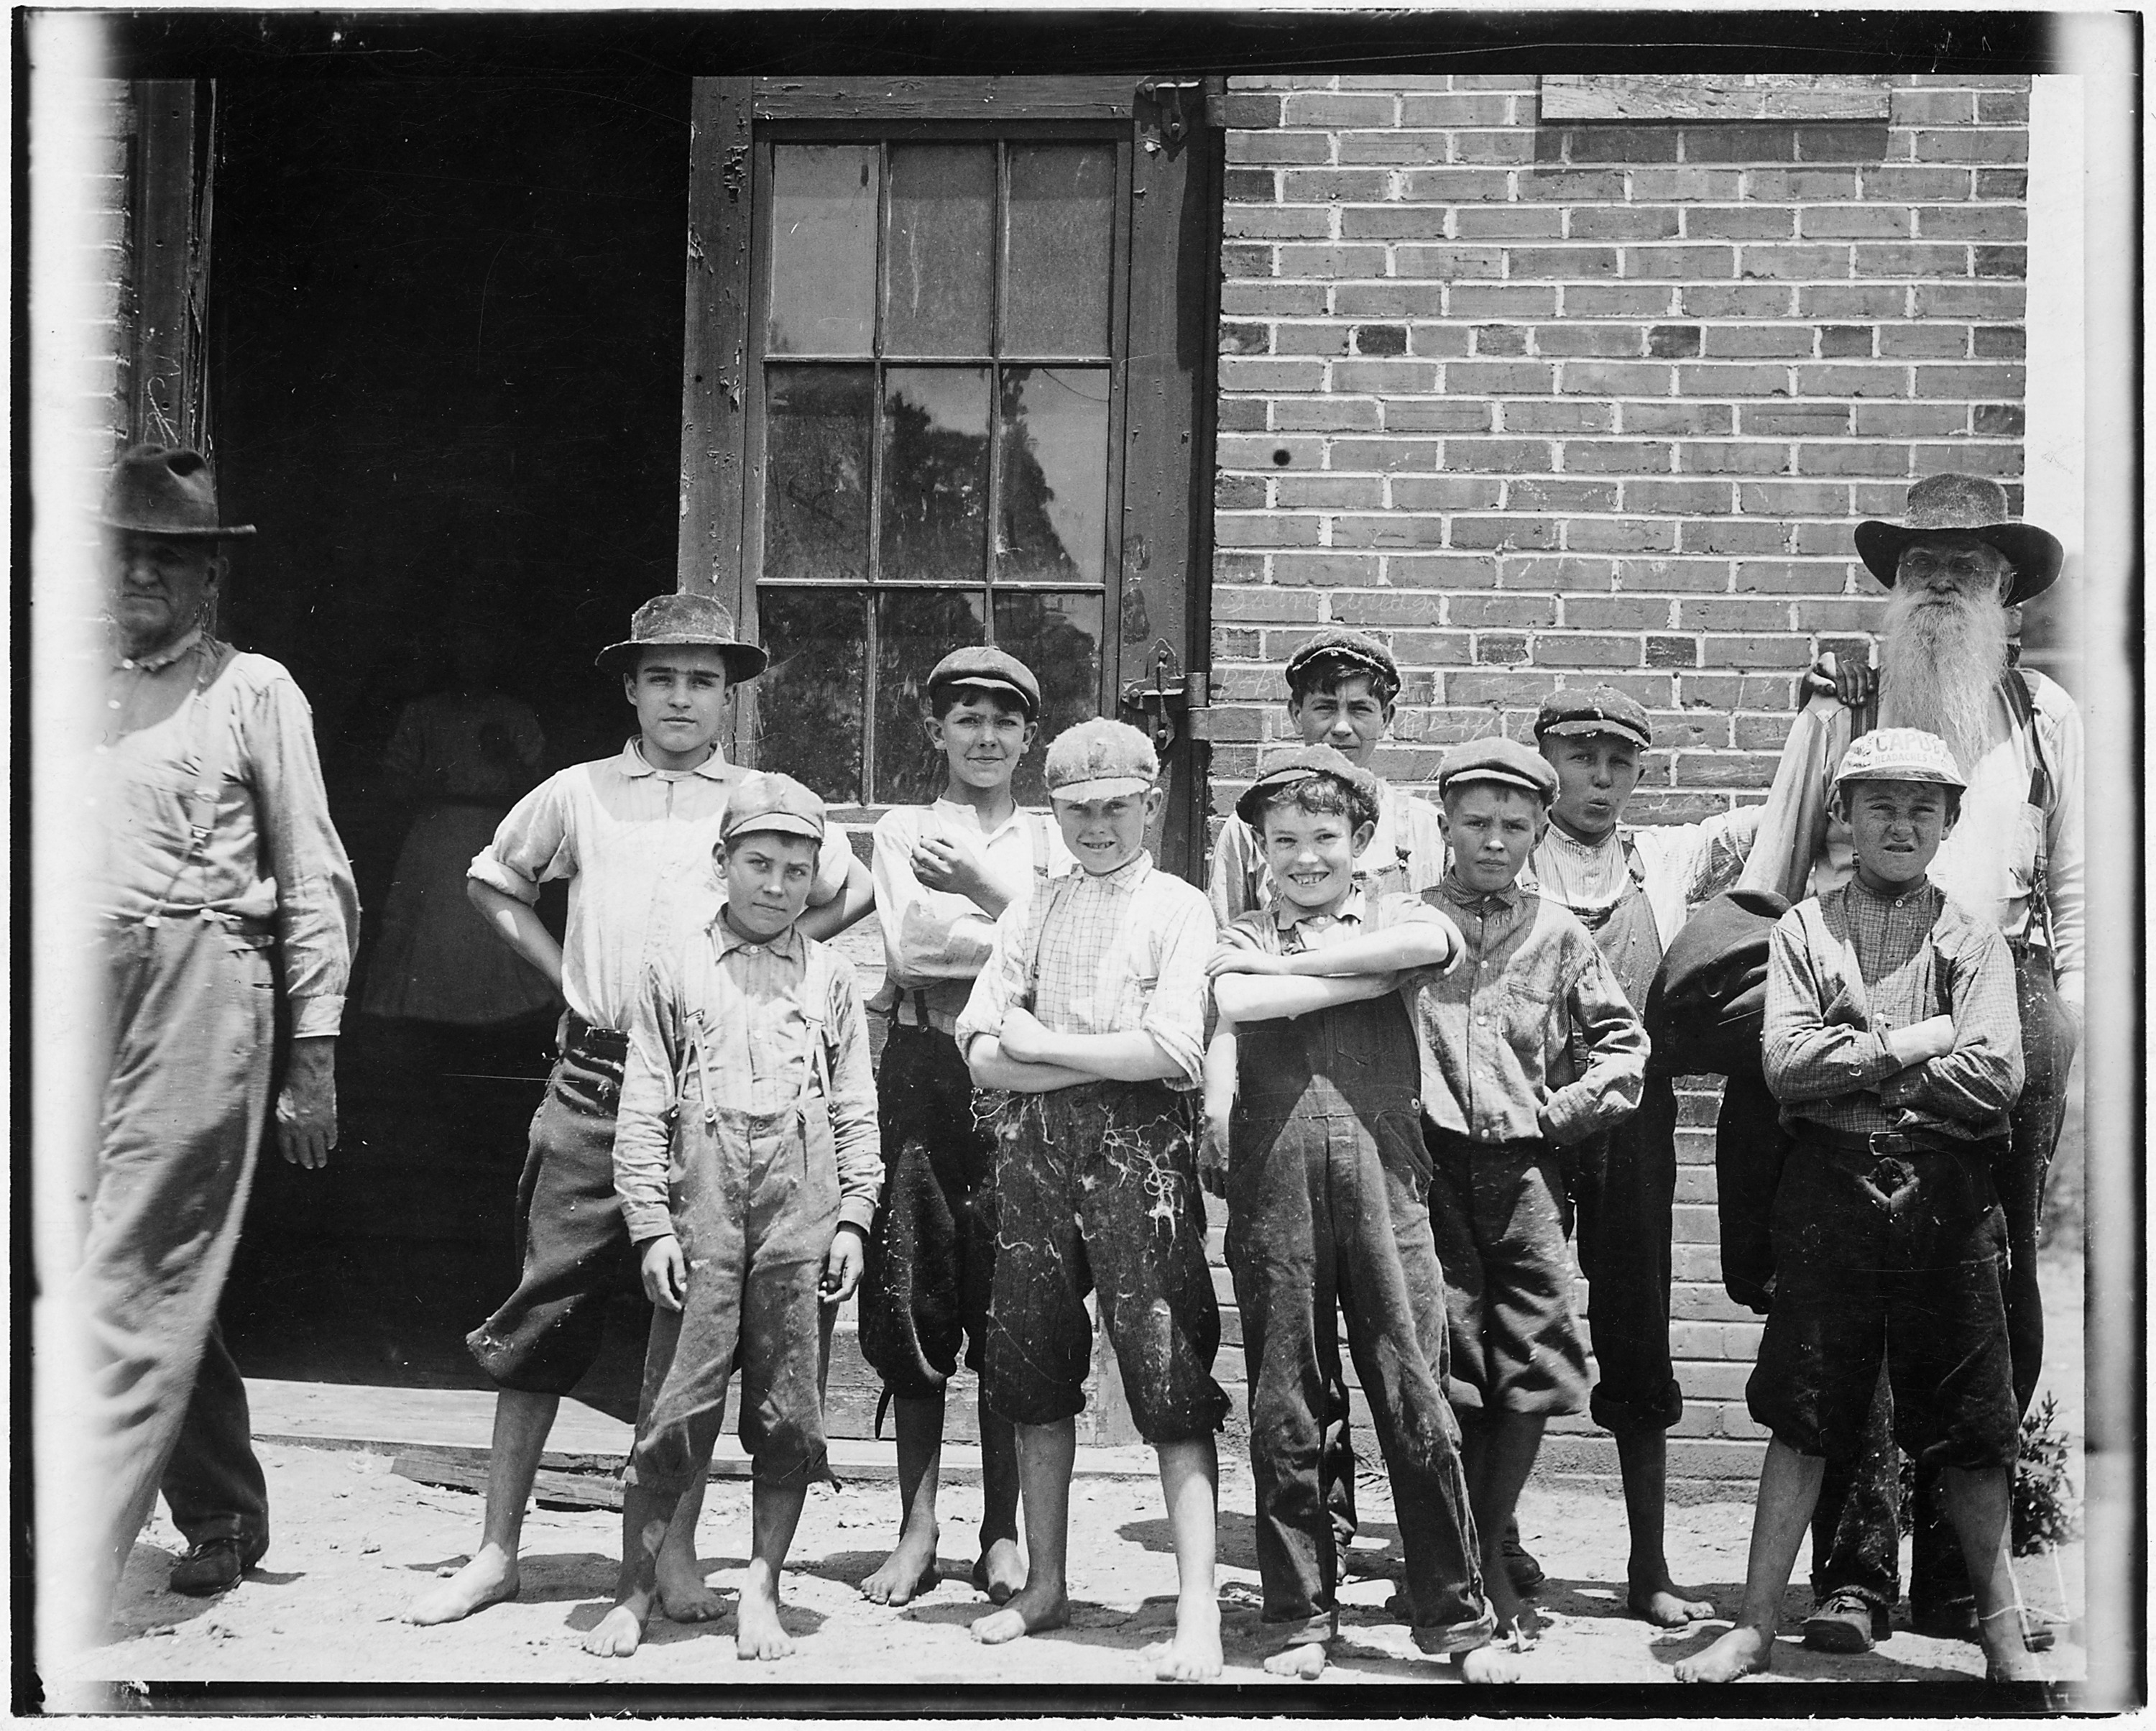 Some of the youngsters in the Belton Mfg. Co. Two of the youngest. Belton, S.C. - NARA - 523544